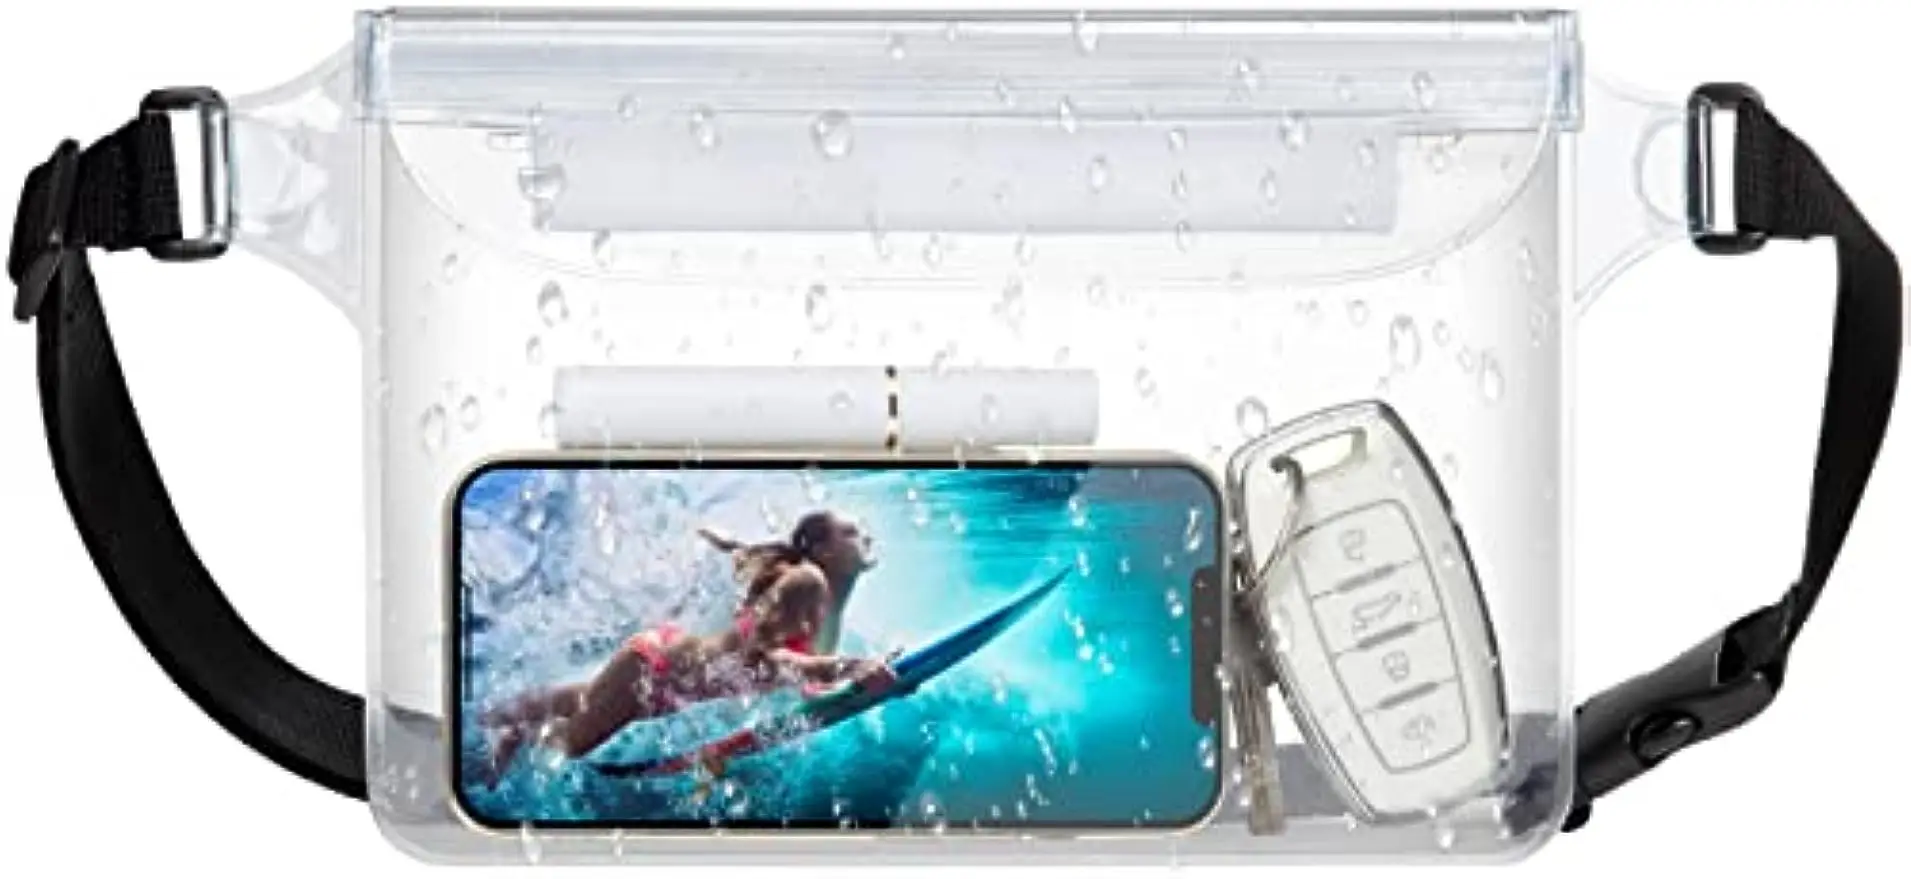 F-color Waterproof Fanny Pack - Waterproof Phone Pouch with Waist Strap - Beach Accessories Waterproof Pouch Dry Bag Keep Phone